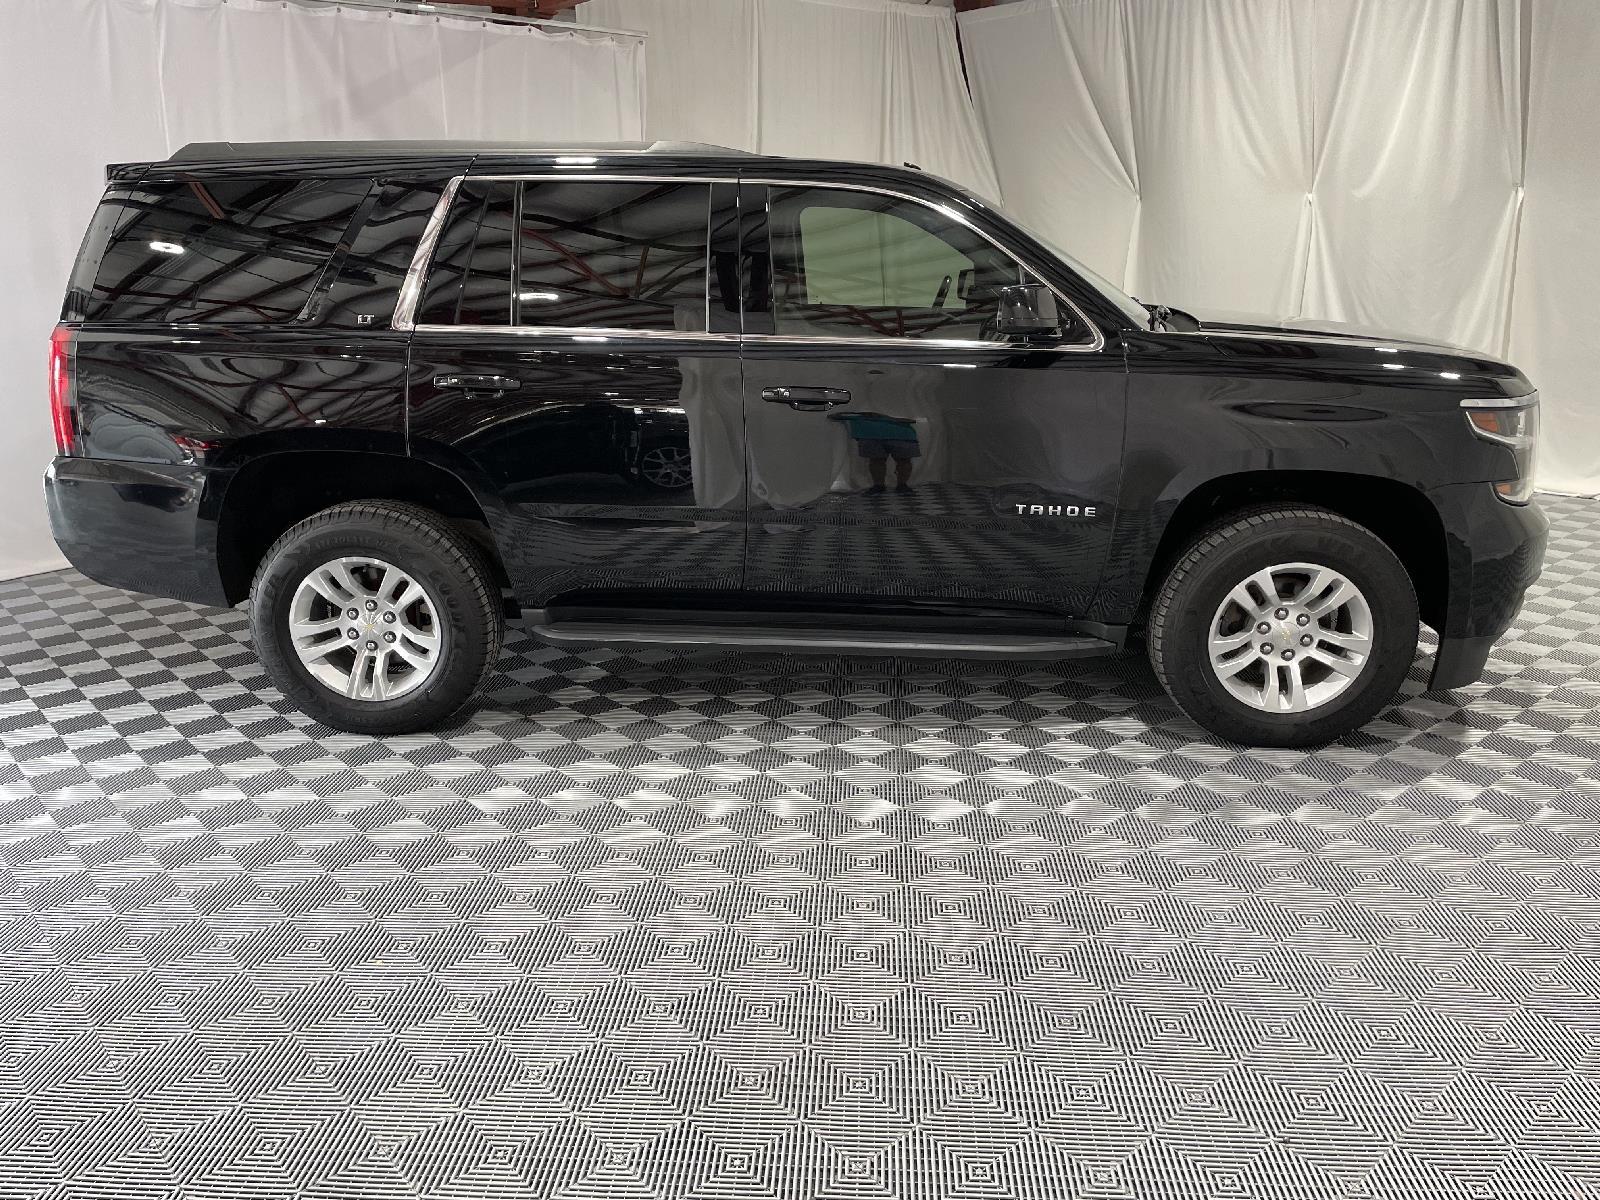 Used 2017 Chevrolet Tahoe LT SUV for sale in St Joseph MO